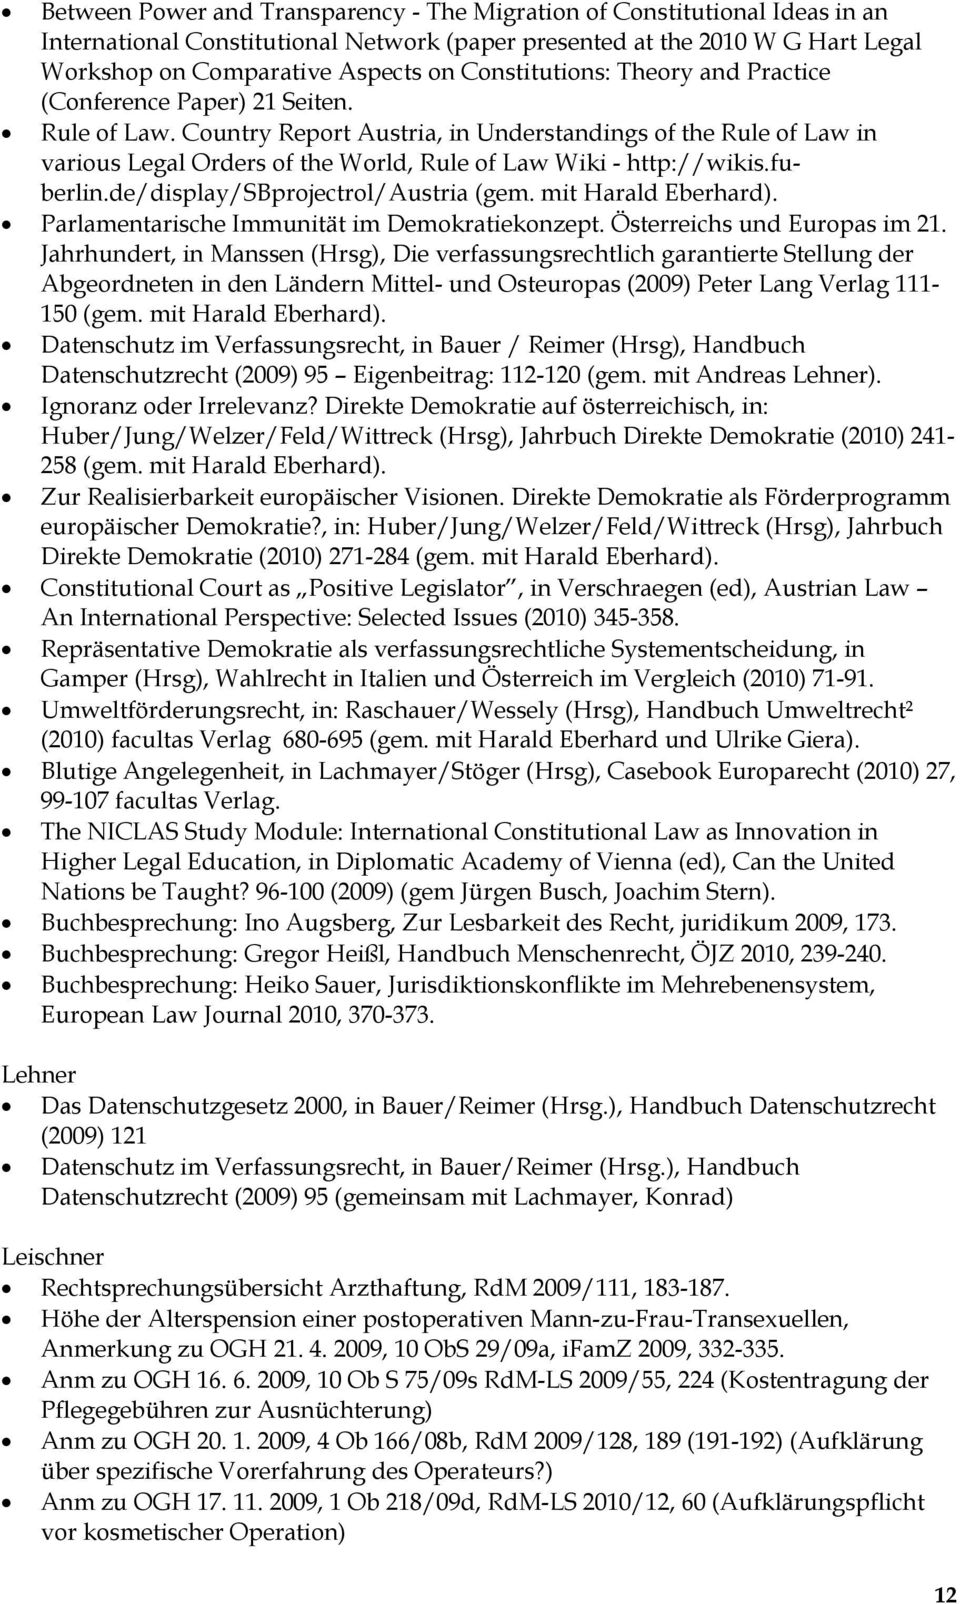 Country Report Austria, in Understandings of the Rule of Law in various Legal Orders of the World, Rule of Law Wiki - http://wikis.fuberlin.de/display/sbprojectrol/austria (gem. mit Harald Eberhard).